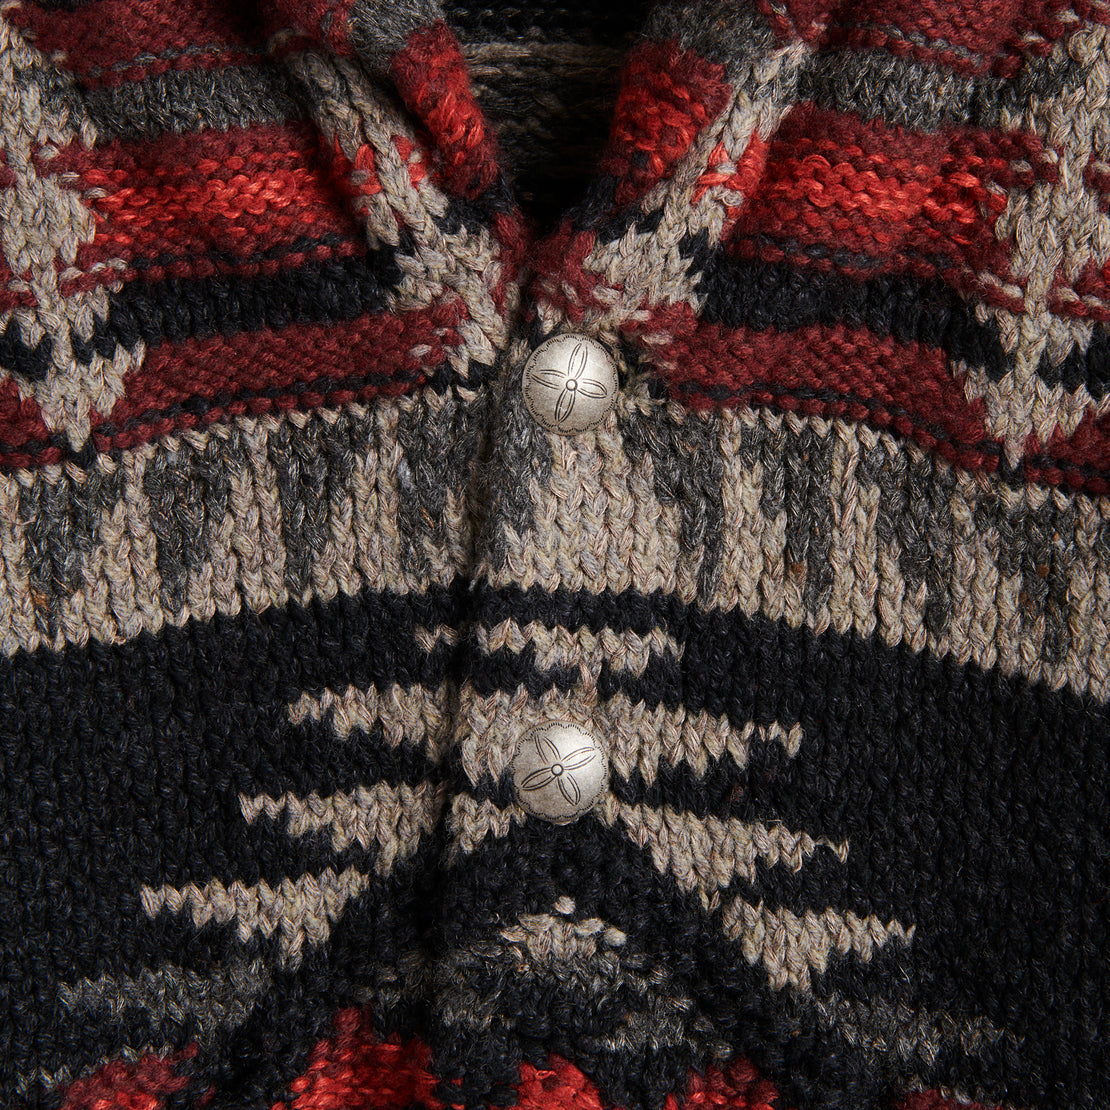 Hand-Knit Shawl Cardigan - Black/Red Multi - RRL - STAG Provisions - W - Tops - Sweater